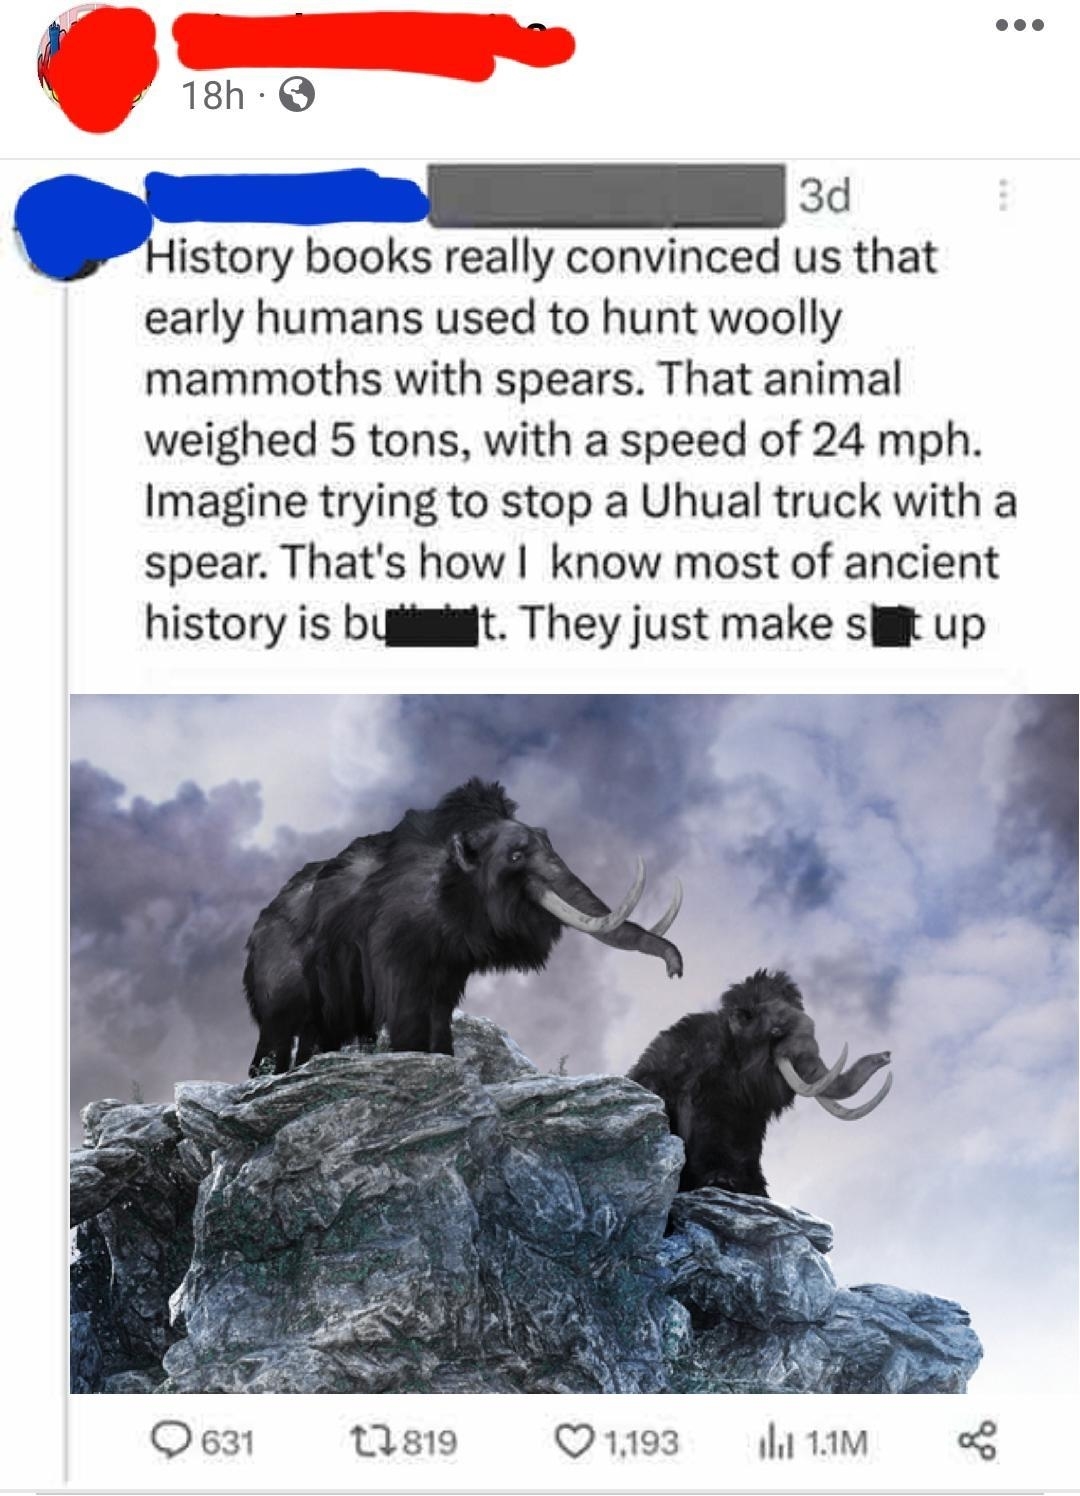 &quot;History books really convinced us that early humans used to hunt woolly mammoths with spears; that animal weighed 5 tons, with a speed of 24 mph; imagine trying to stop a Uhual truck with a spear — that&#x27;s how I know most of ancient history is BS&quot;